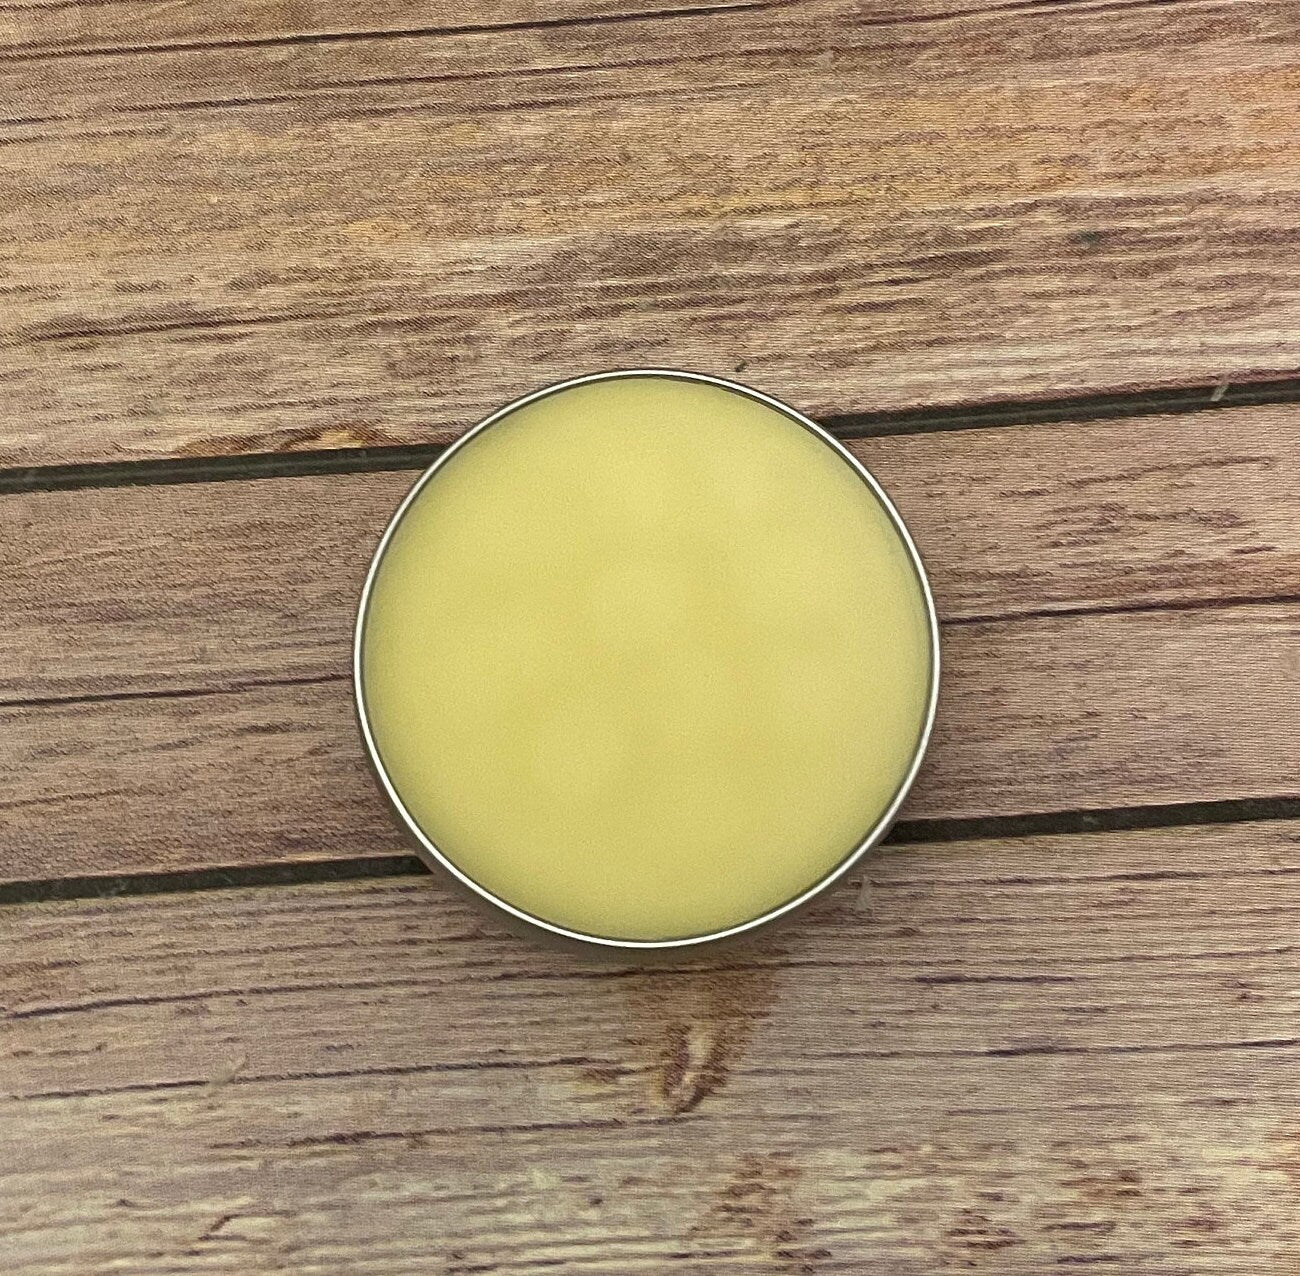 Ivy Creek Fir Forest Beard Balm | Natural Conditioning for Your Manly Whiskers | 2 oz | Ready to Ship